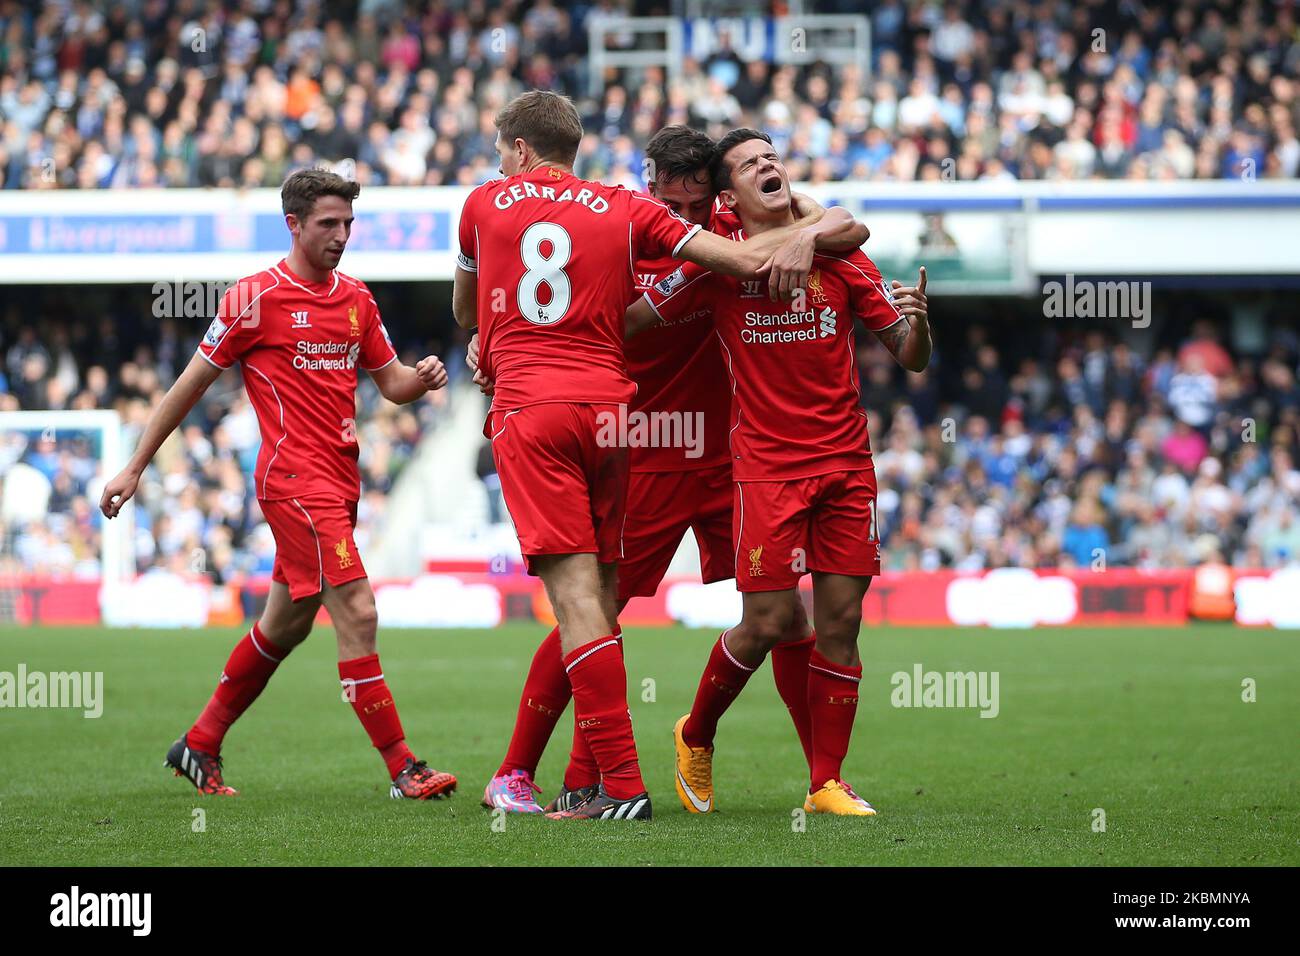 Liverpool Midfielder Philippe Coutinho celebrates with his team mates after he scores making it 1-2 in the second half during the Barclays Premier League Match between Queens Park Rangers & Liverpool at Loftus Road, London on Sunday October 19th 2014 (Photo by MI News/NurPhoto) Stock Photo